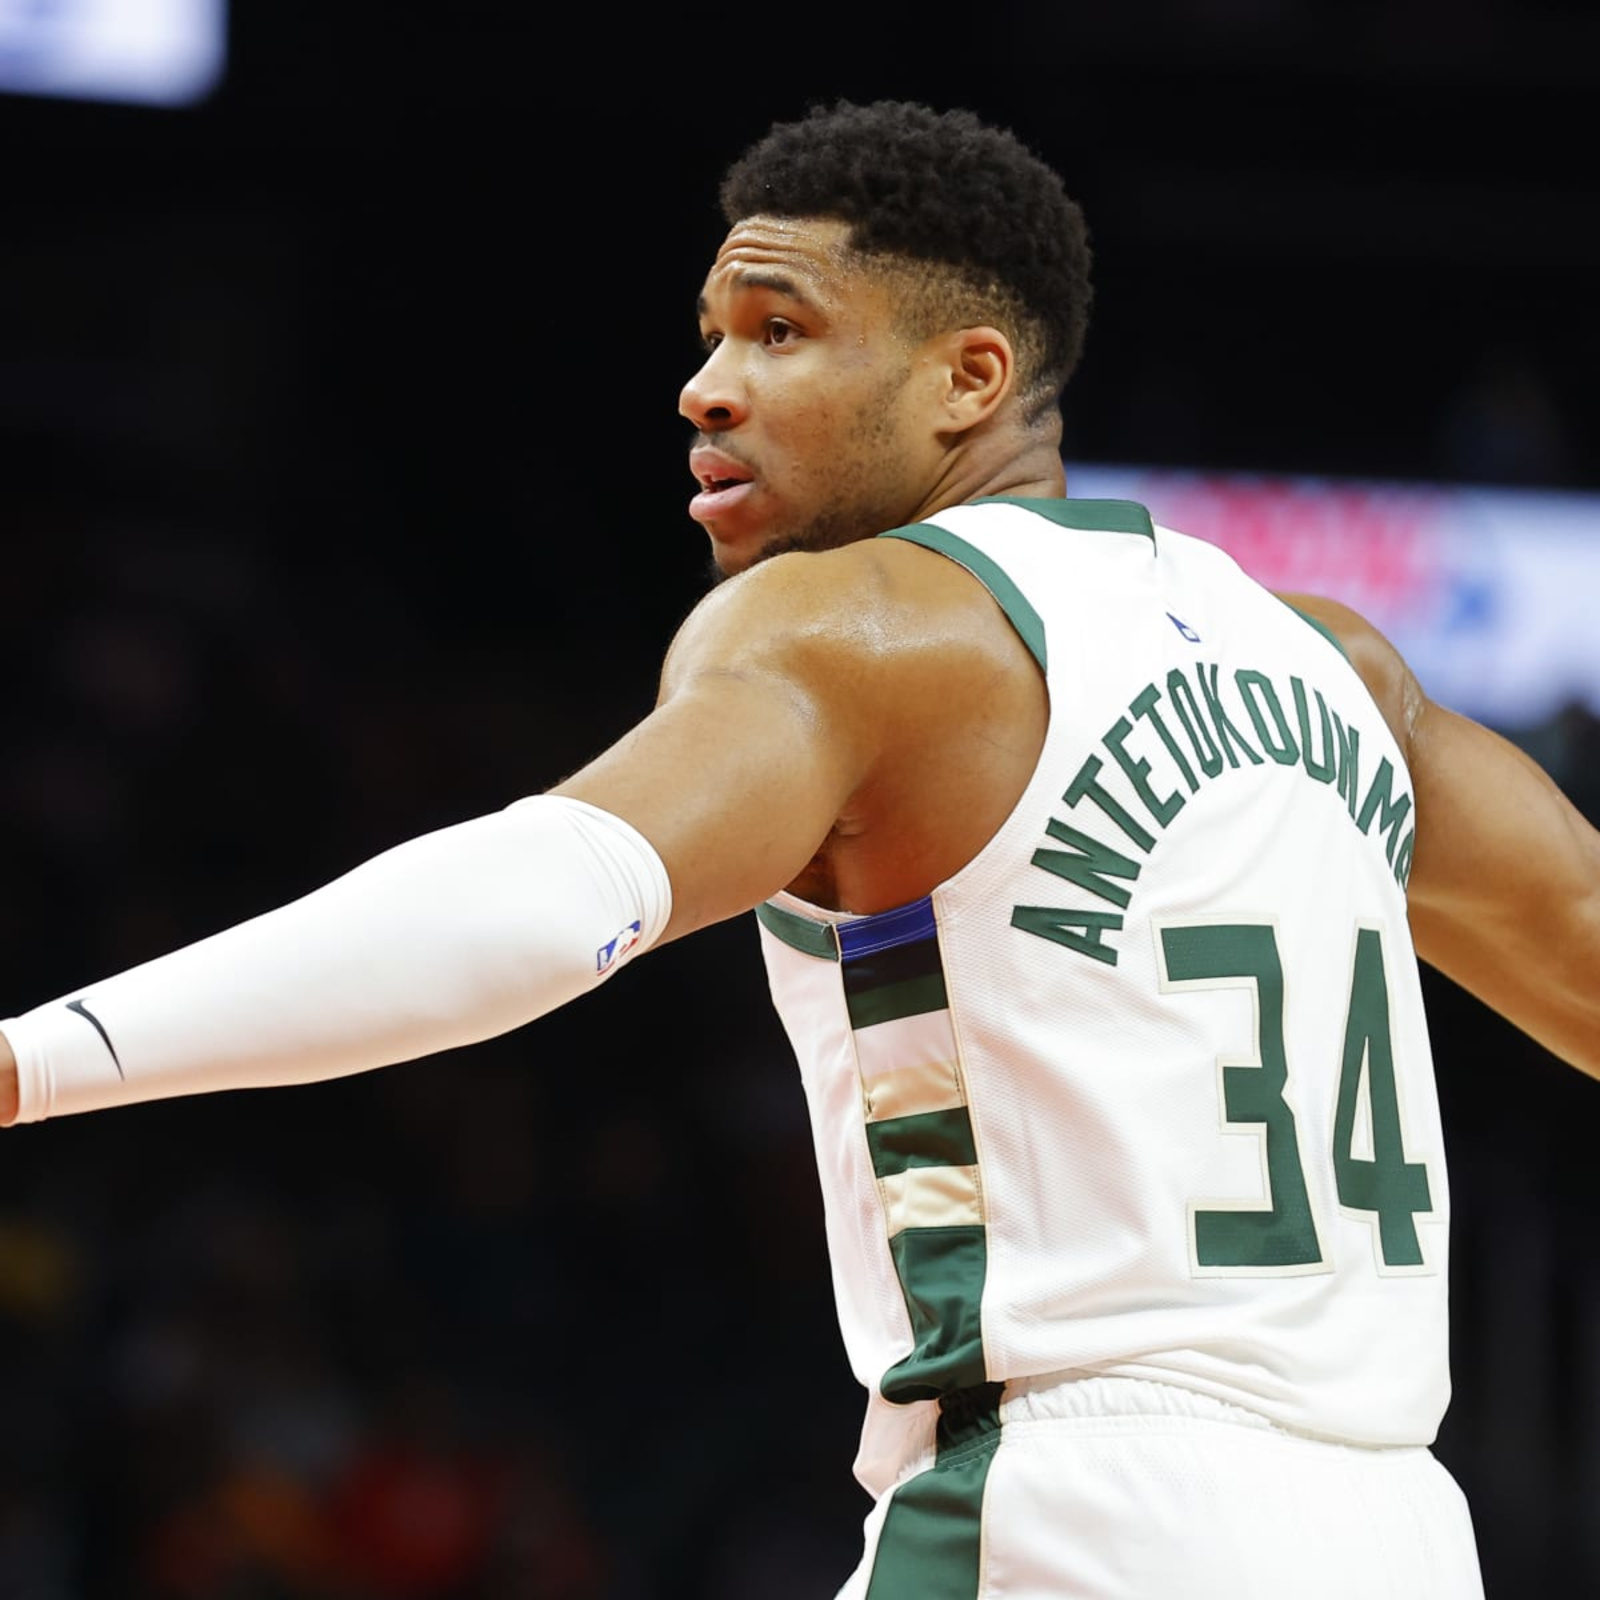 What's special about Giannis Antetokounmpo's jersey number 34? - Hindustan  Times